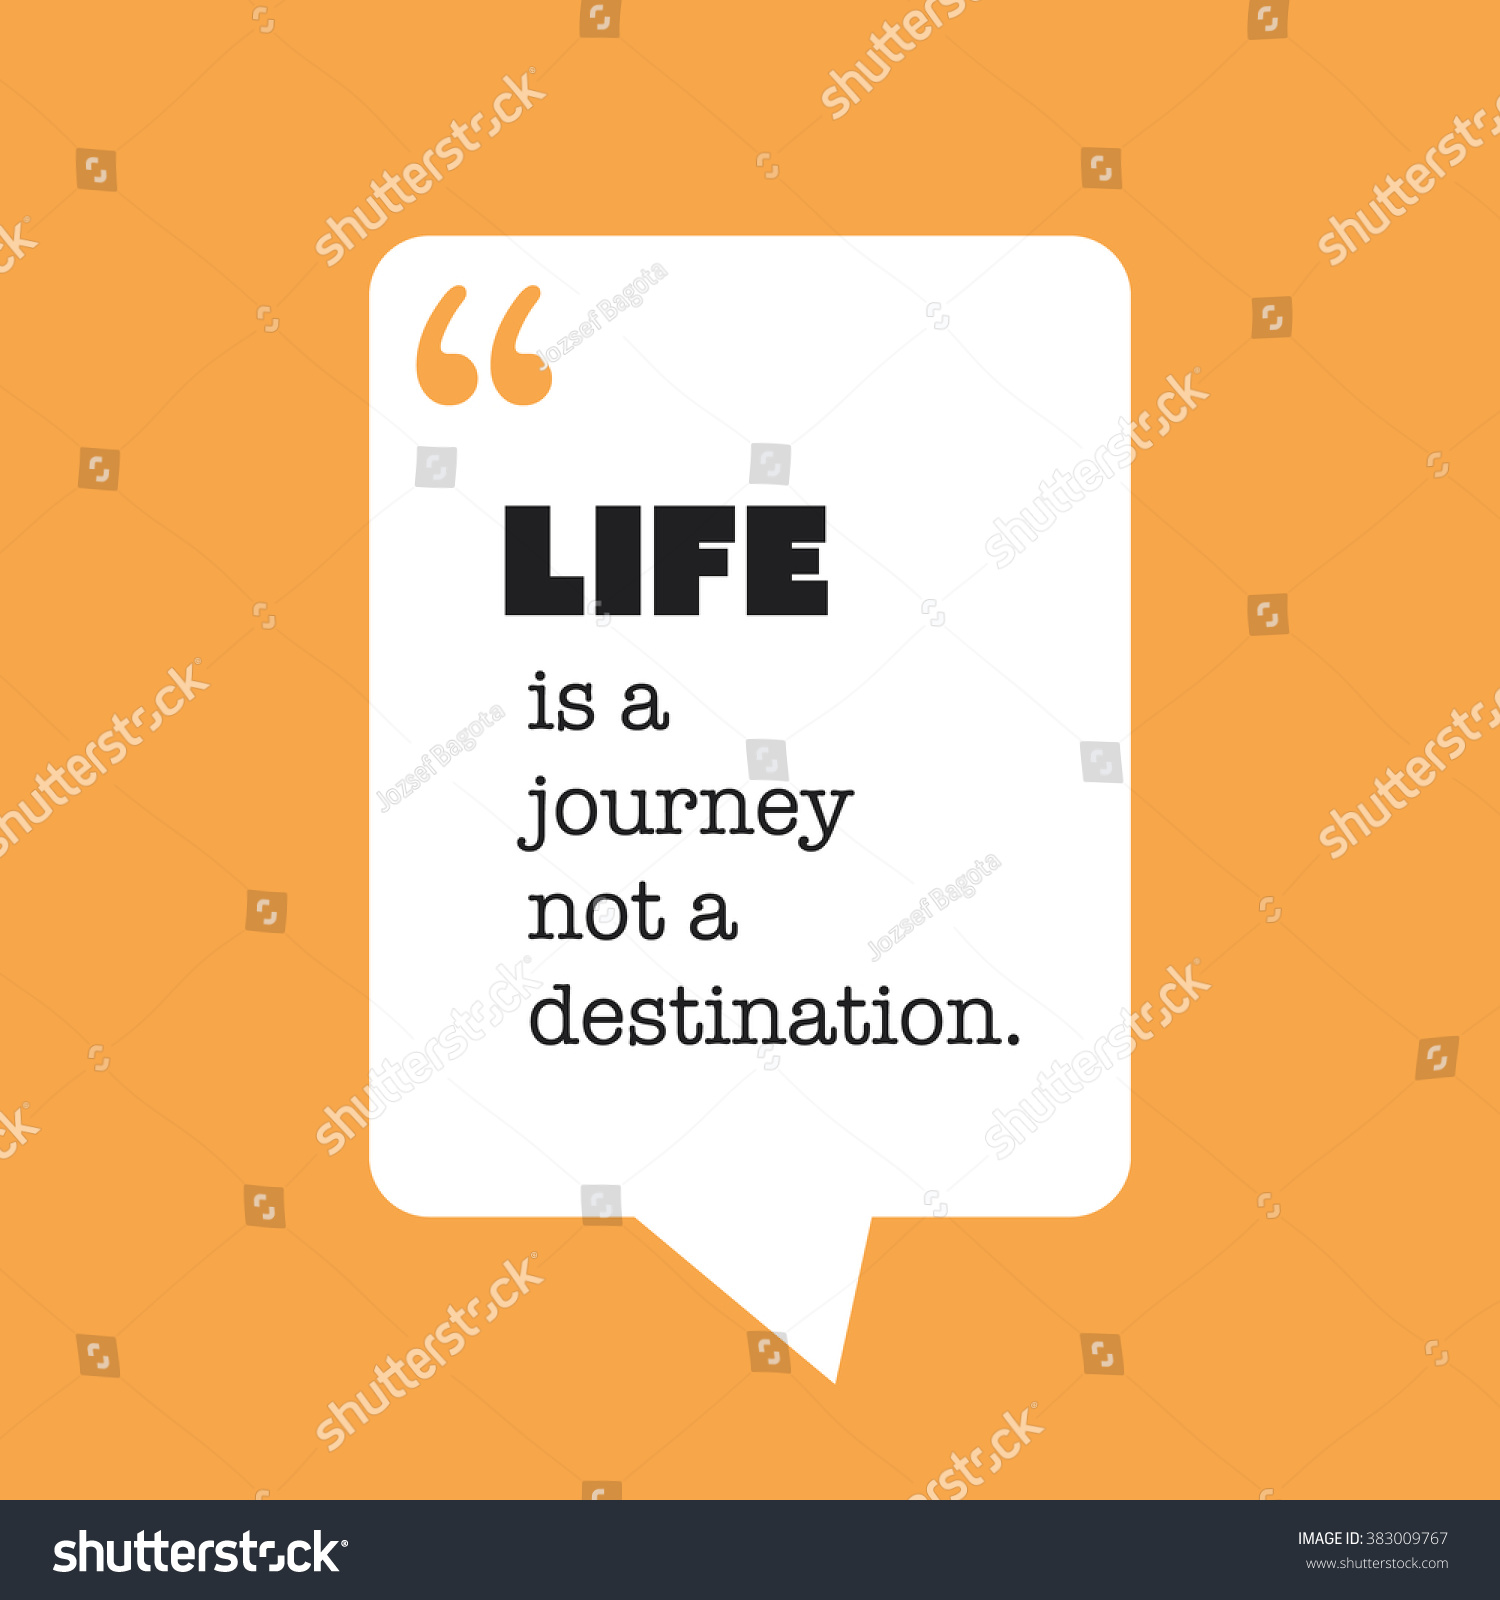 Life Is A Journey Not A Destination Inspirational Quote Slogan Saying on